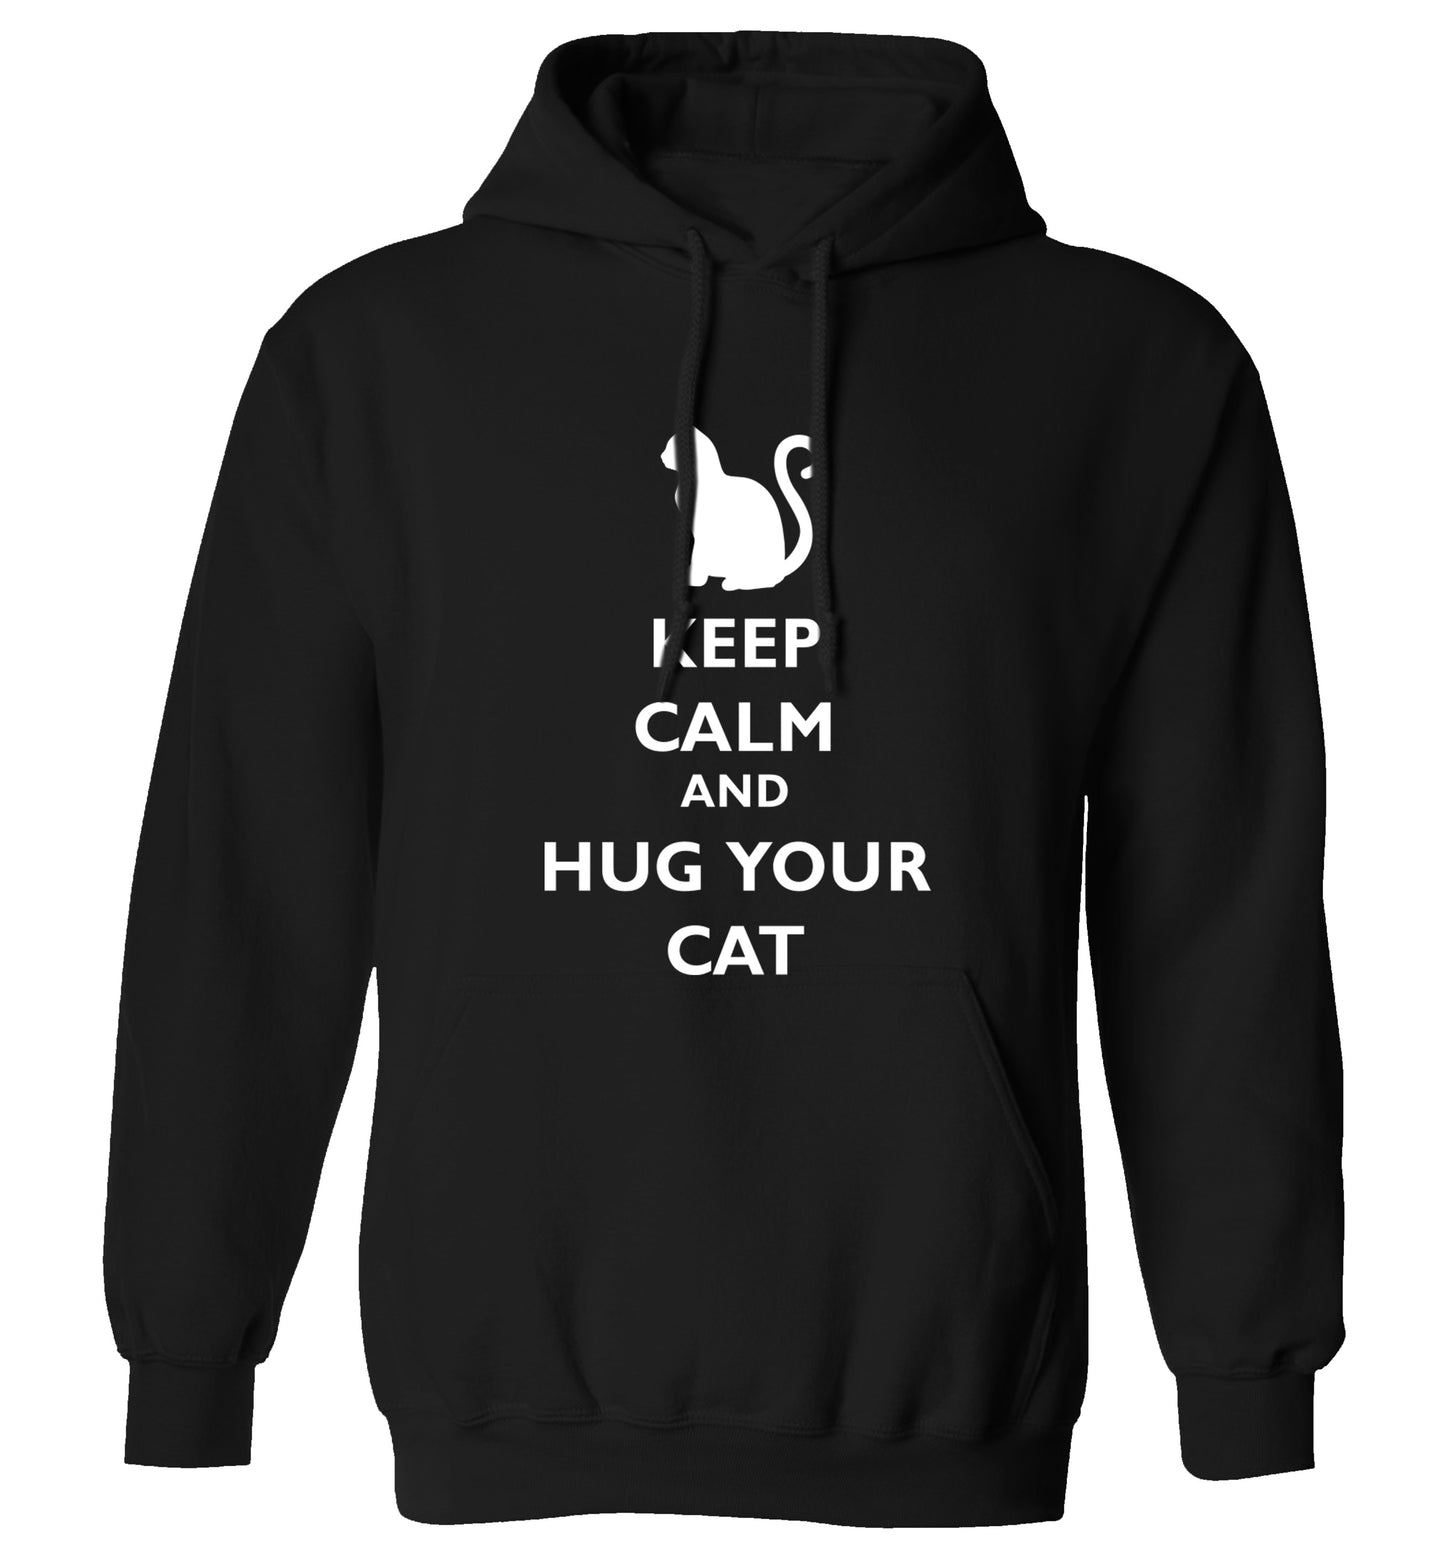 Keep calm and hug your cat adults unisex black hoodie 2XL